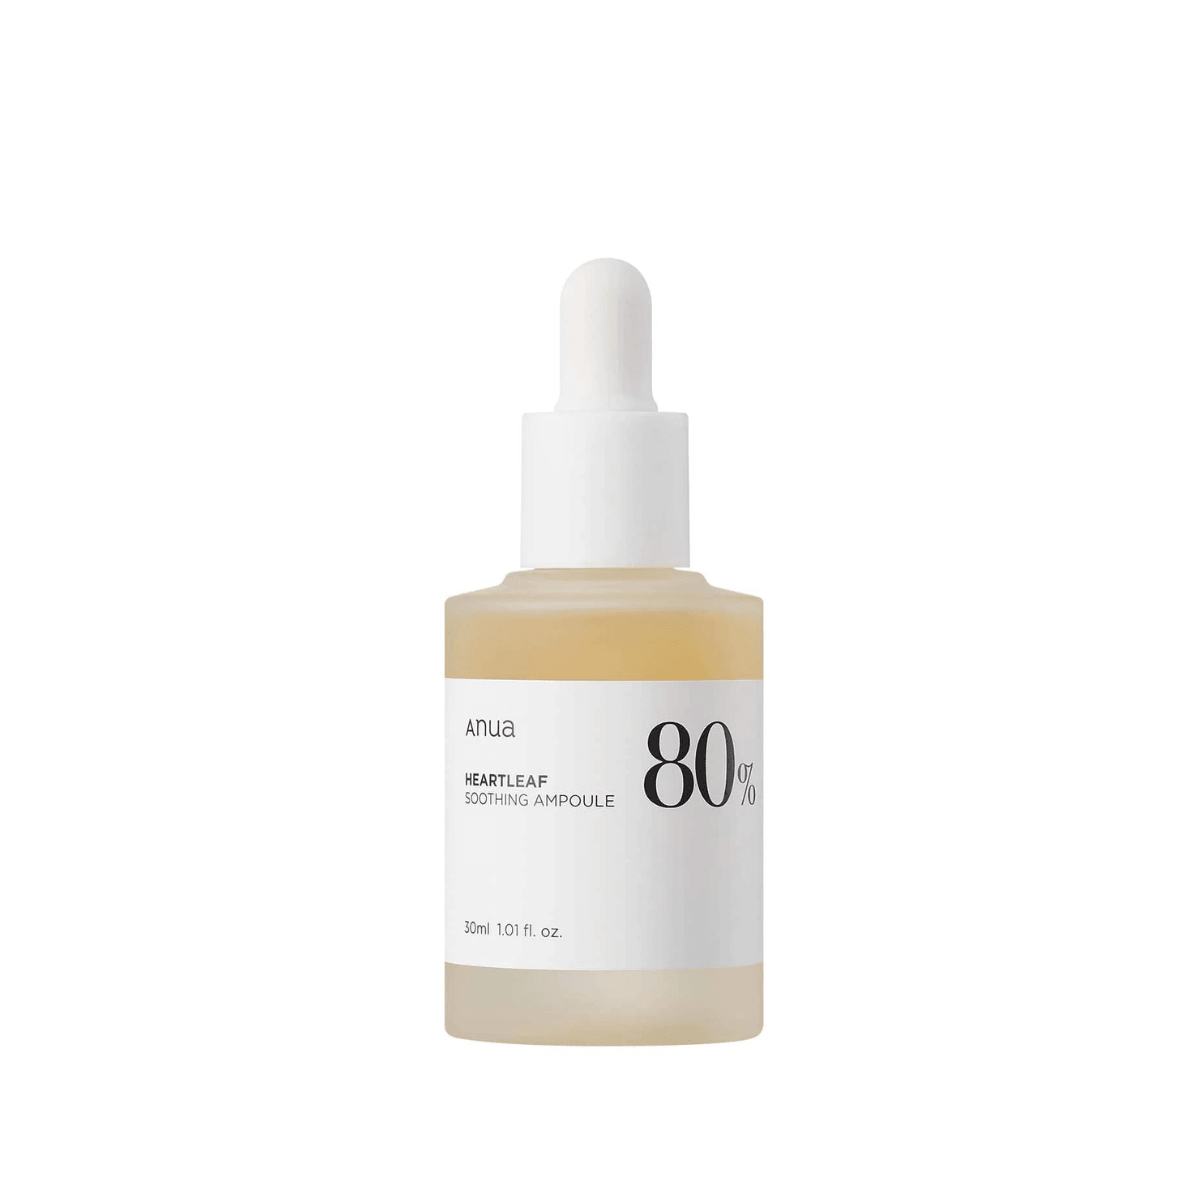 HeartLeaf 80% Soothing Ampoule - 30 ml